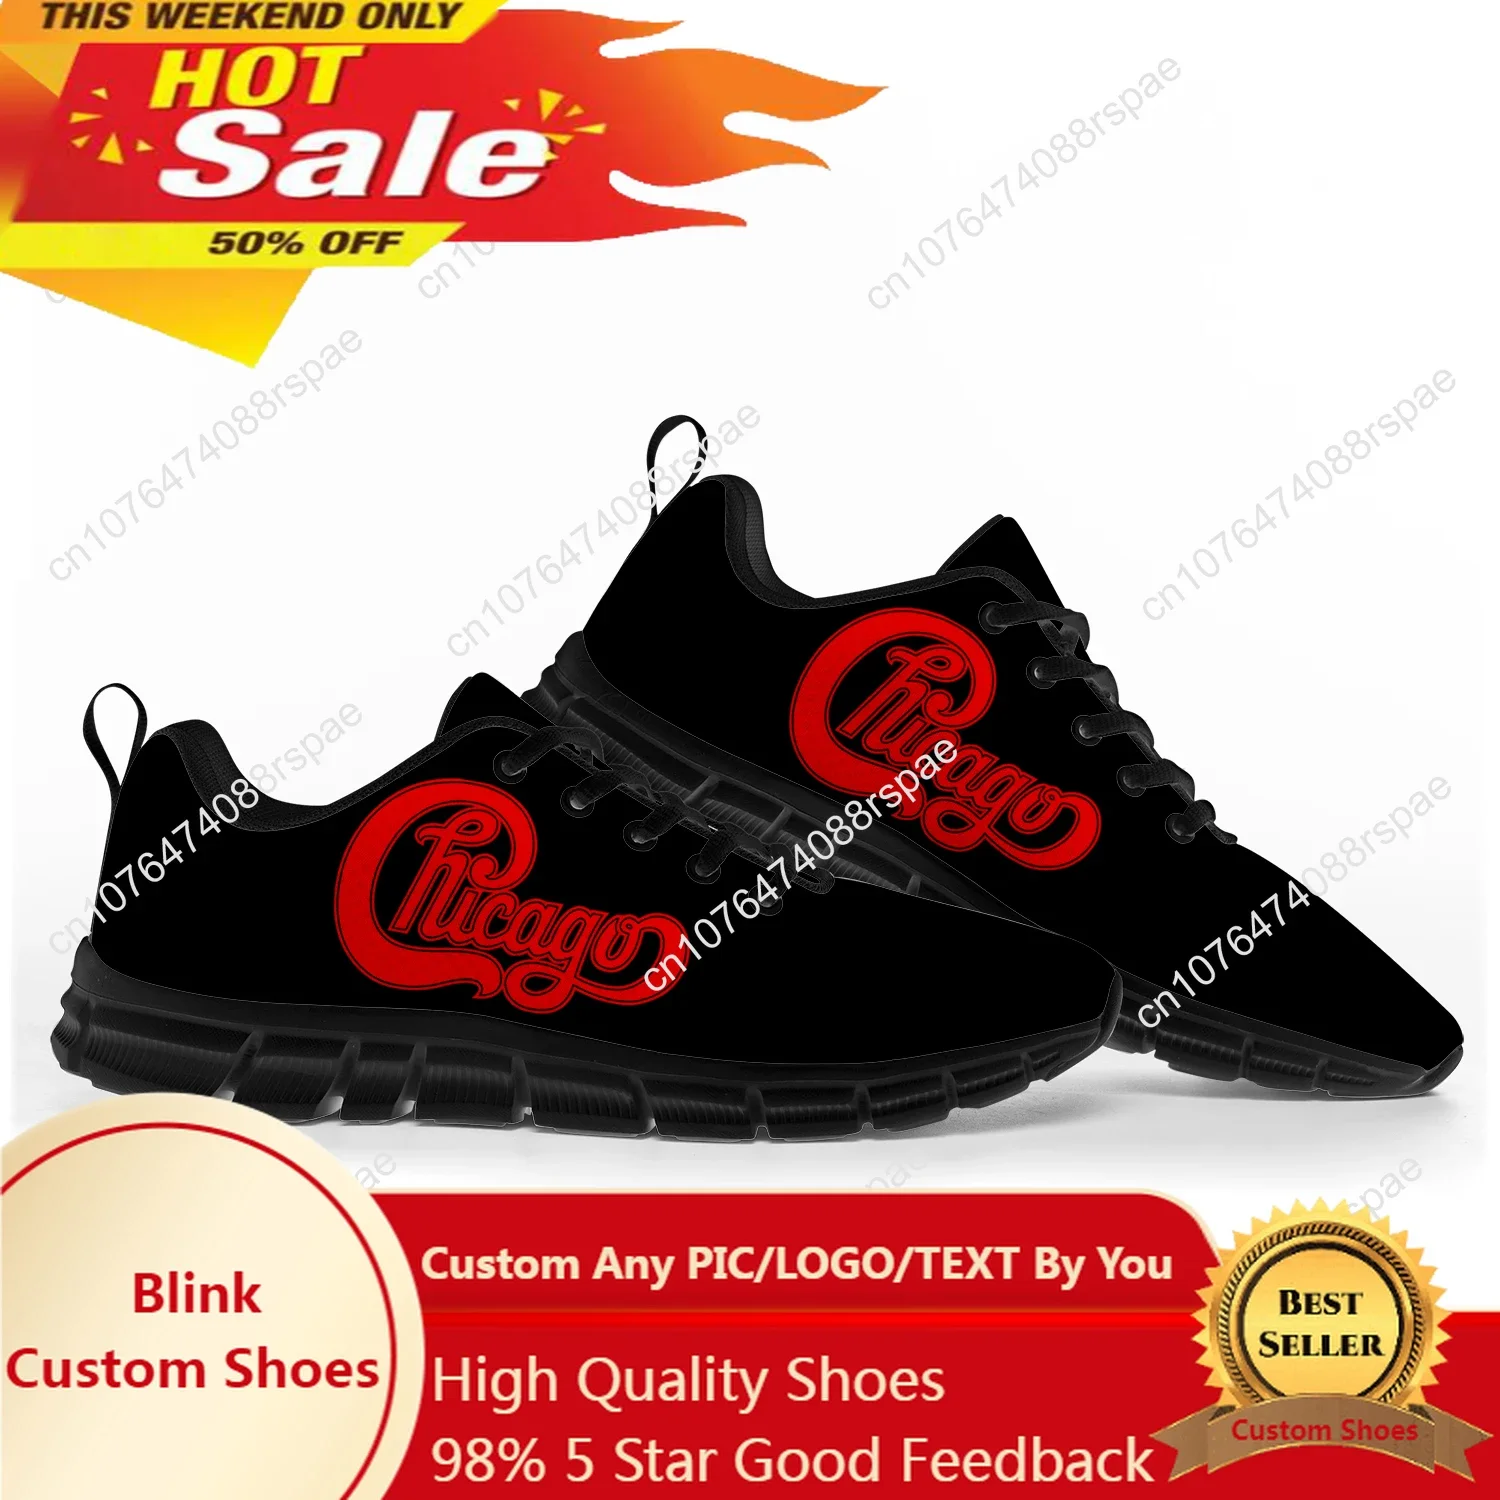 Chicago Band Rock Band Sports Shoes Mens Womens Teenager Kids Children Sneakers Casual Custom High Quality Couple Shoes Black